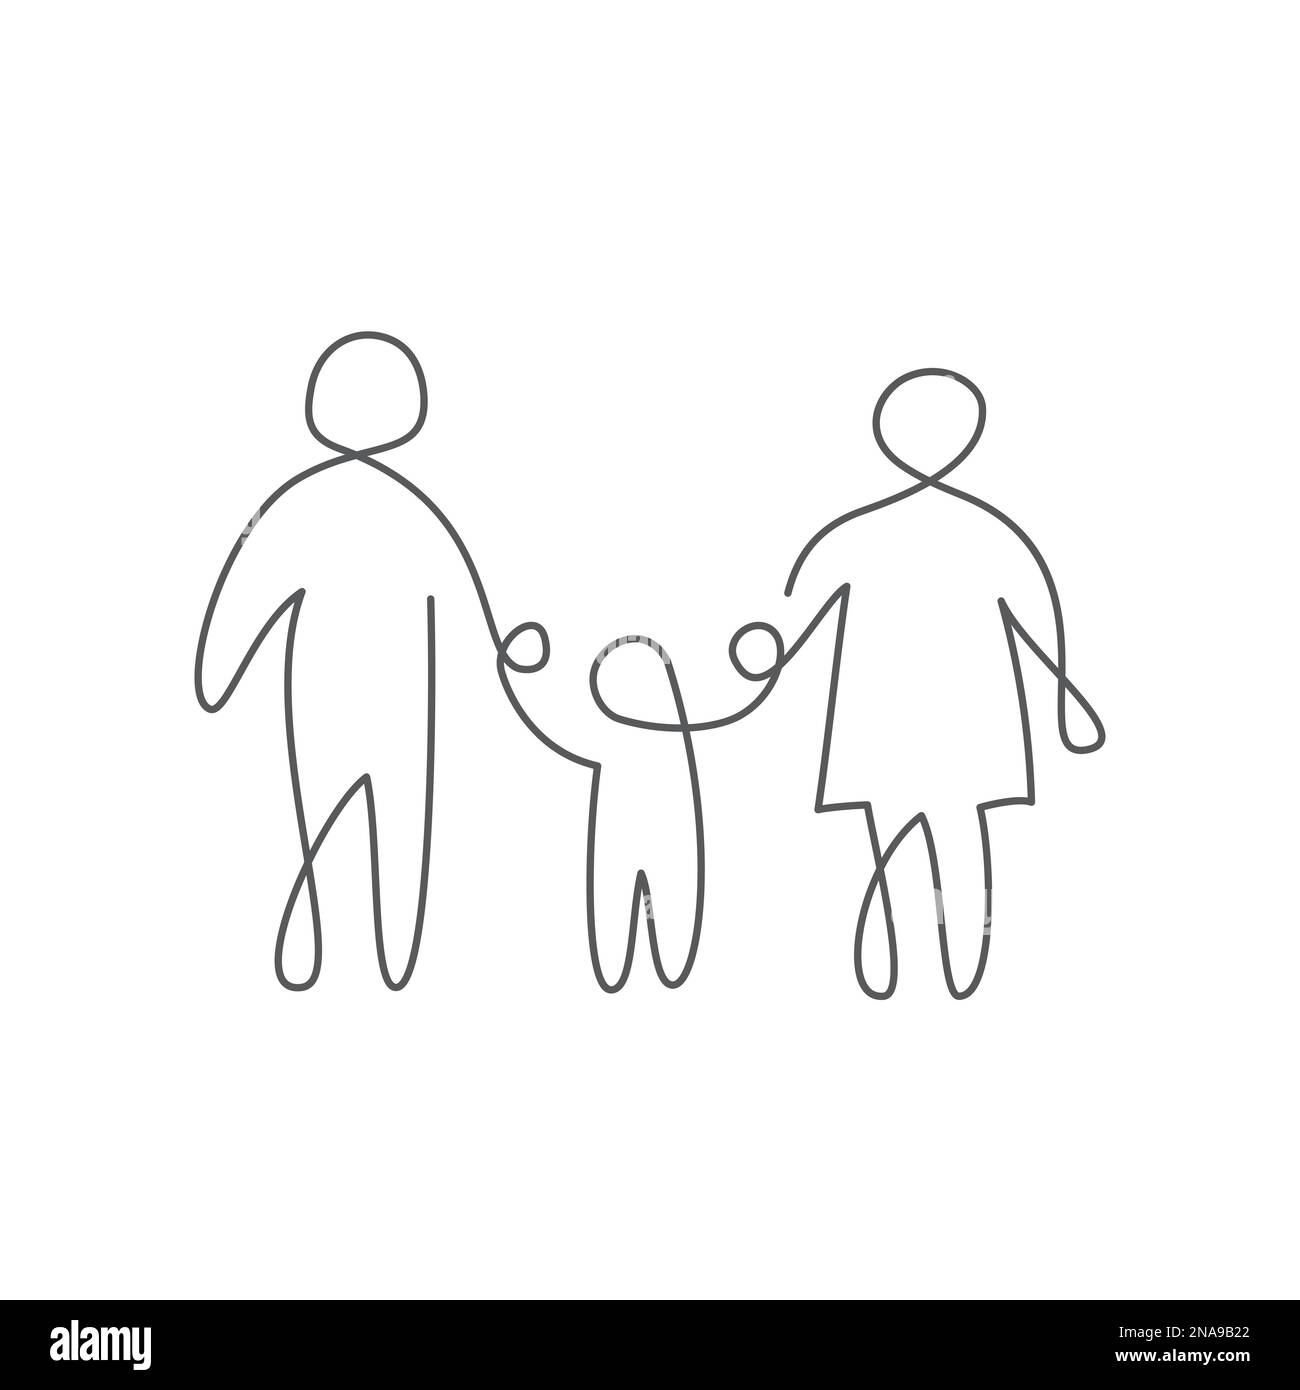 Family One line drawing on white background Stock Vector